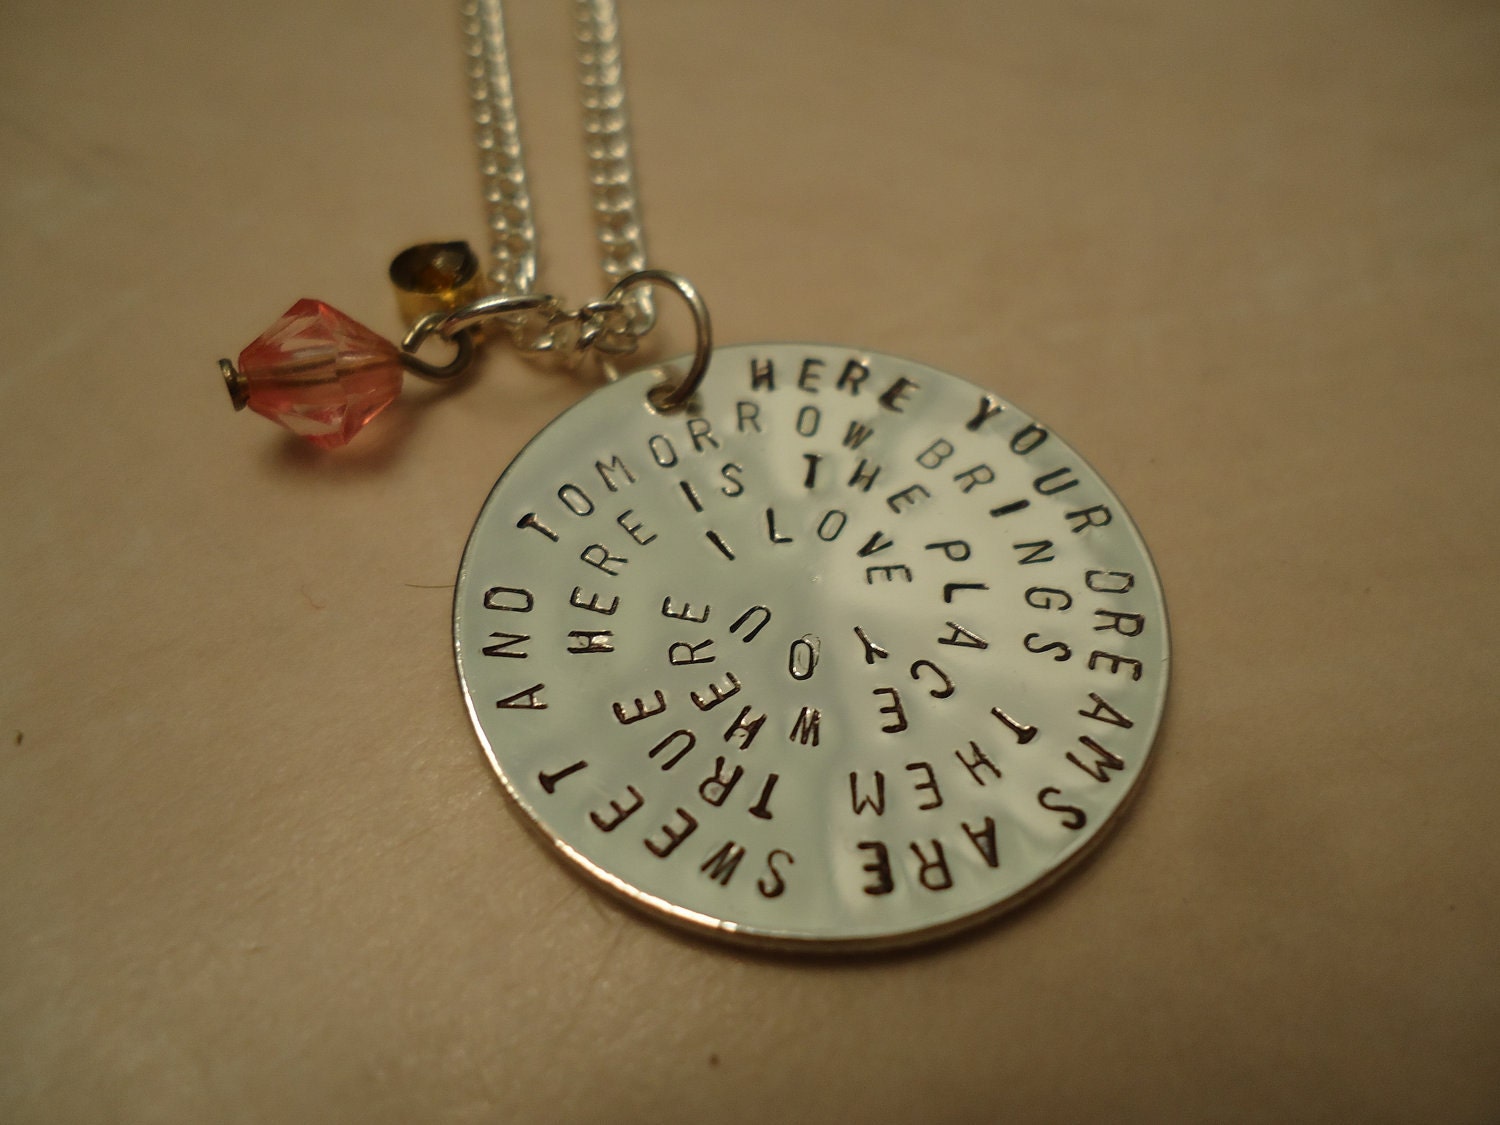 The Hunger Games Inspired Geekery  -  Rue's Lullaby Hand Stamped Silver Necklace With Charms  - FREE SHIPPING